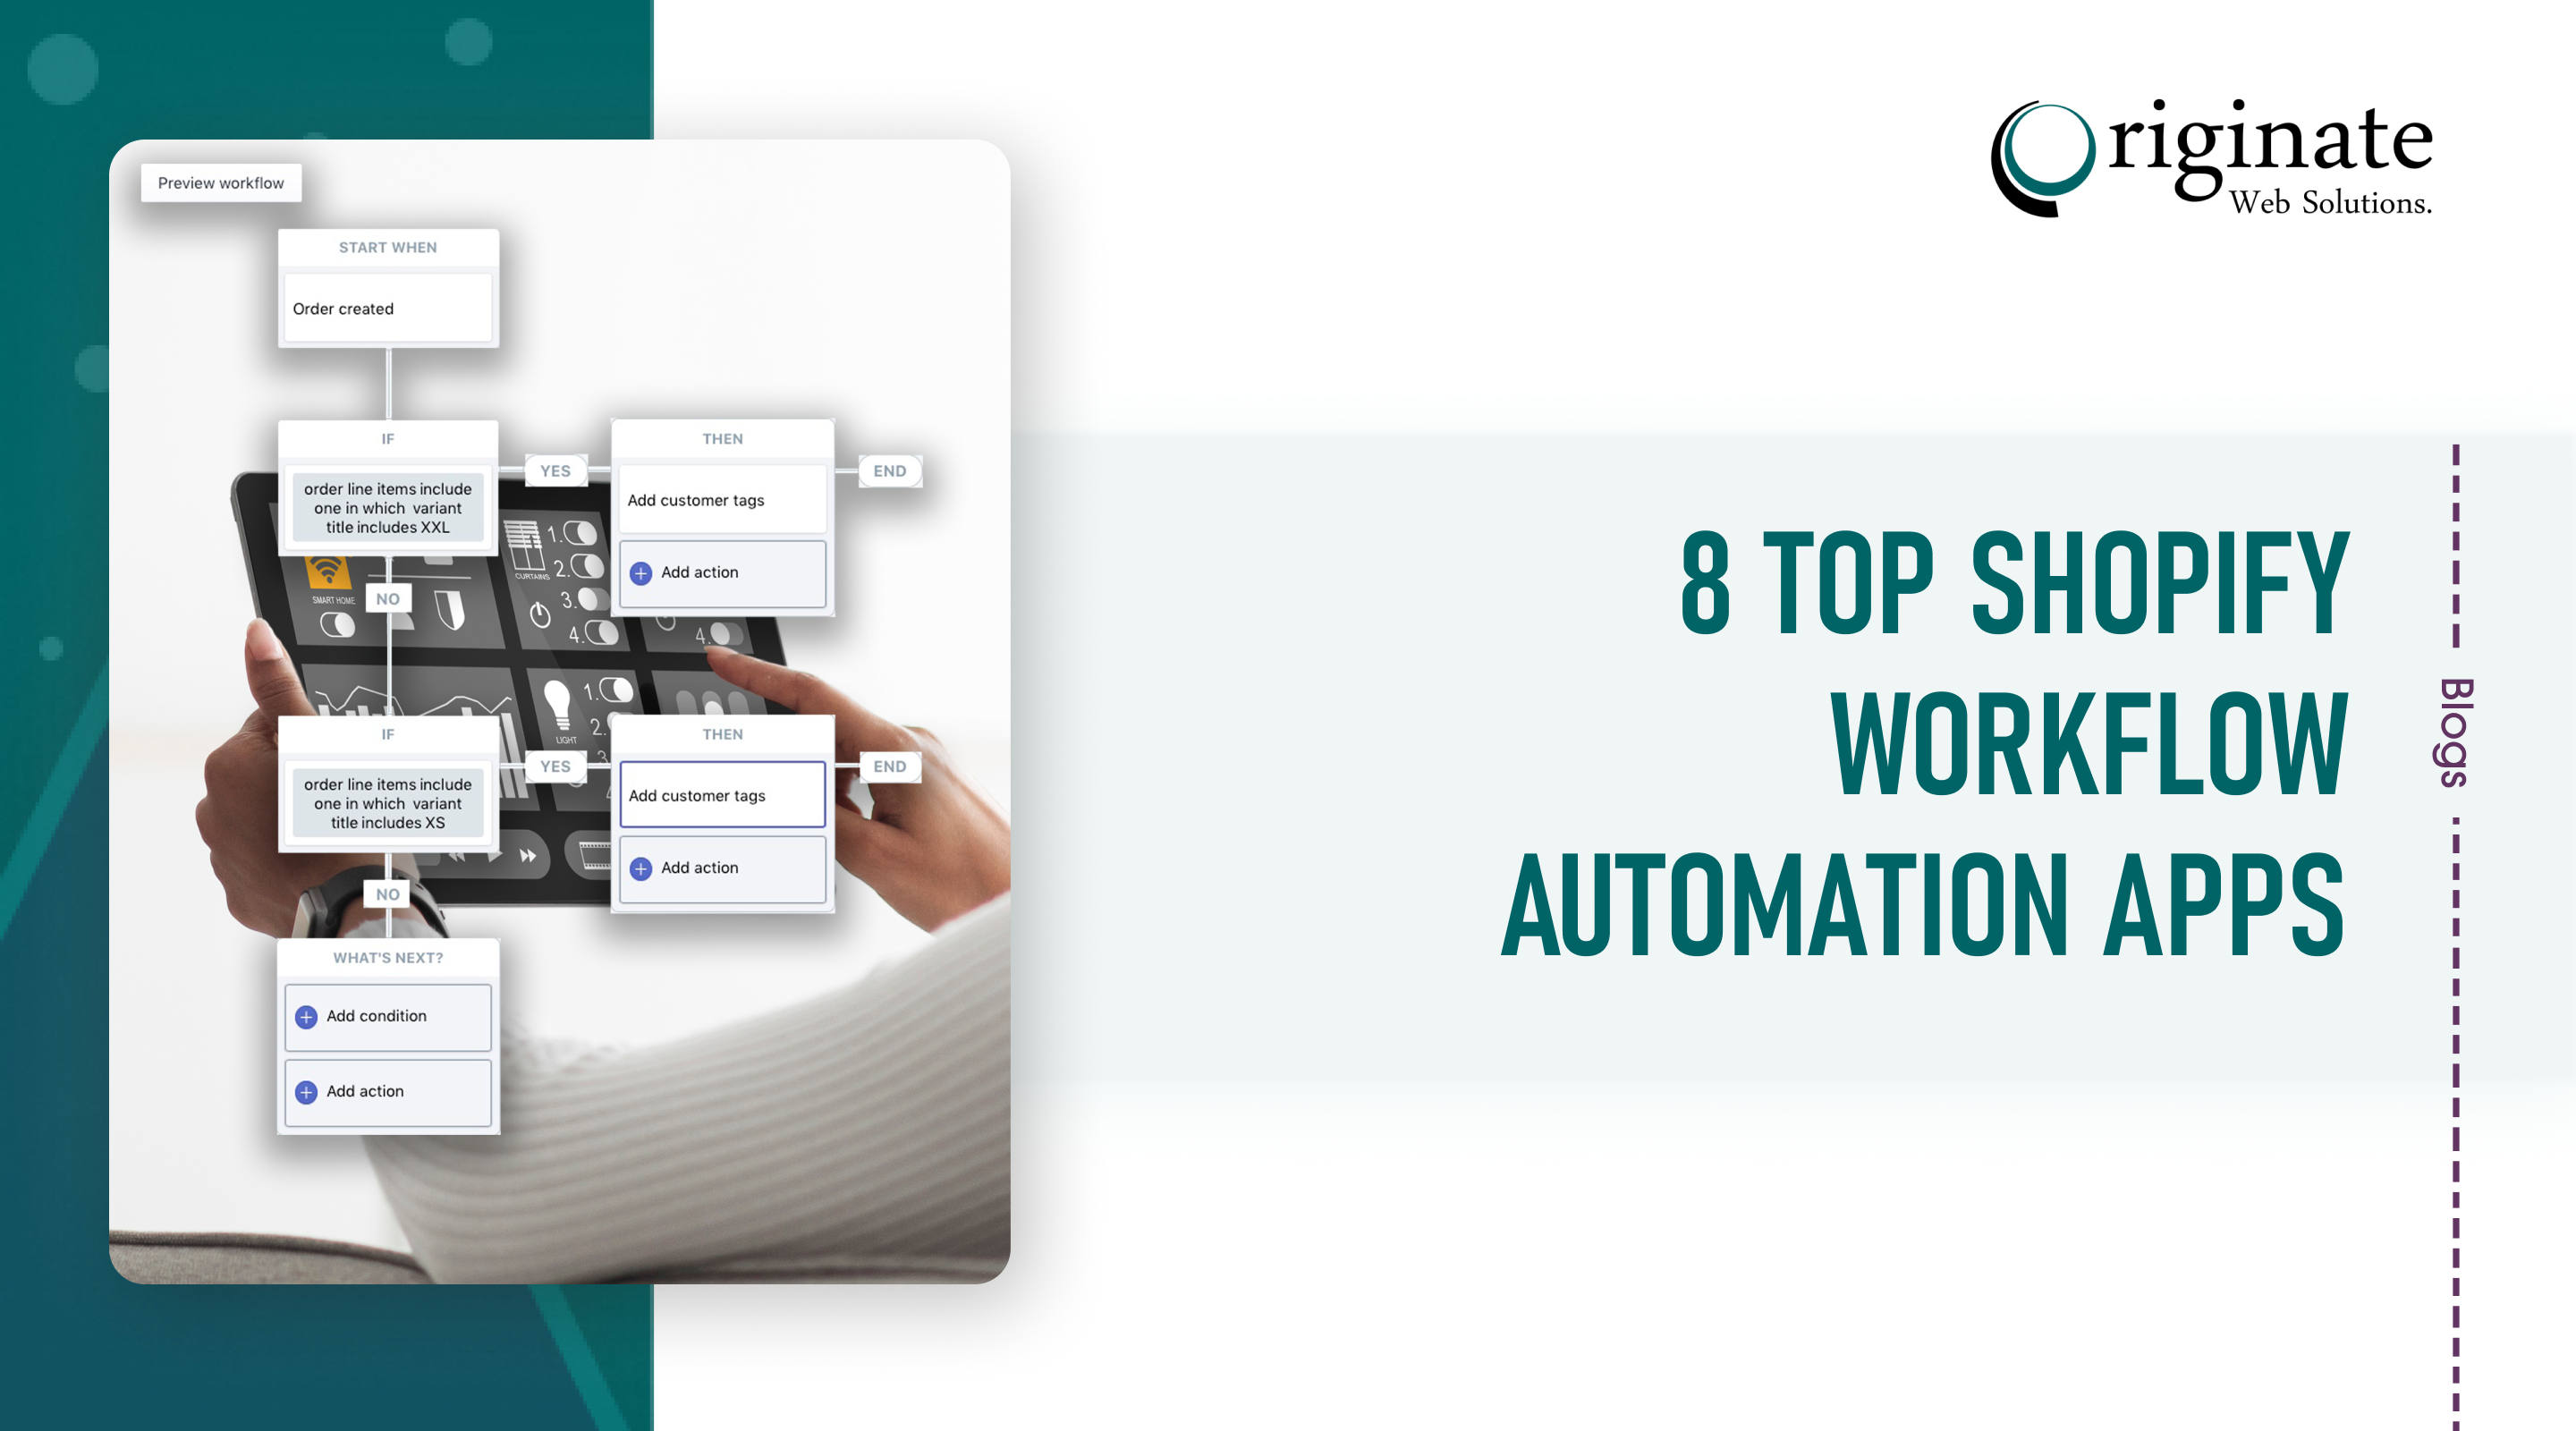 8 Top Shopify Workflow Automation Apps